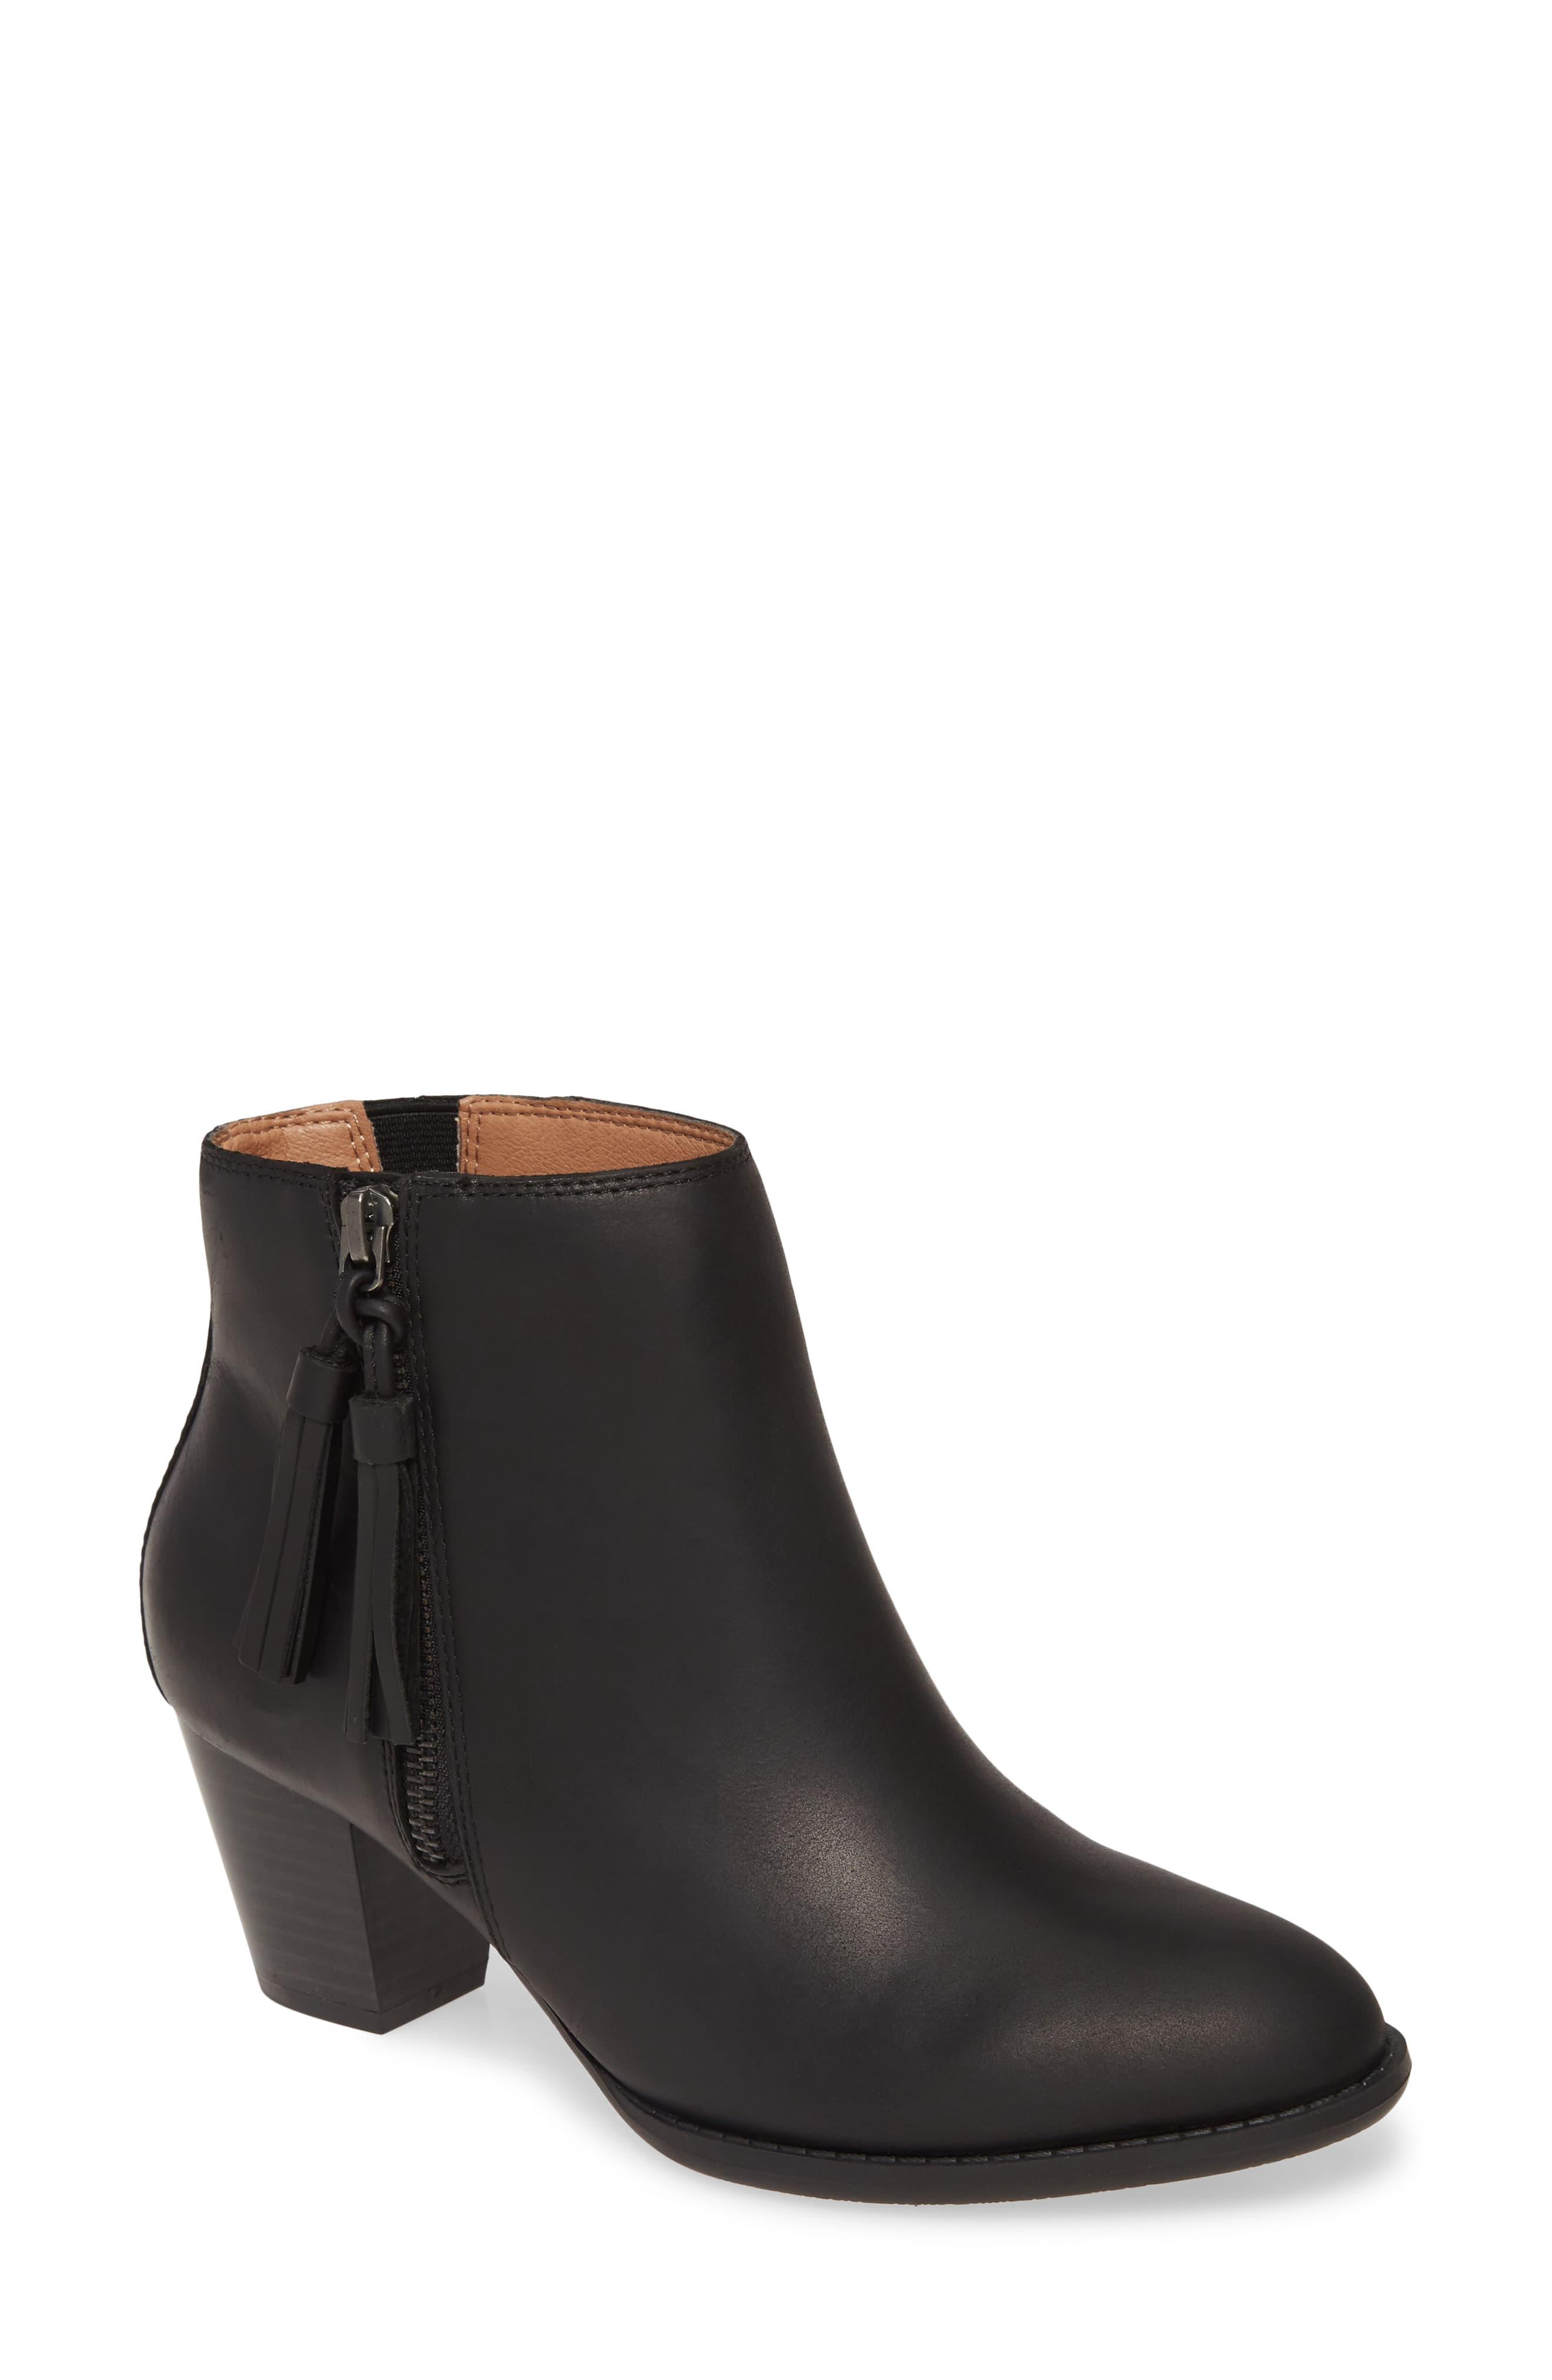 Vionic Madeline Bootie in Black Leather (Black) - Lyst